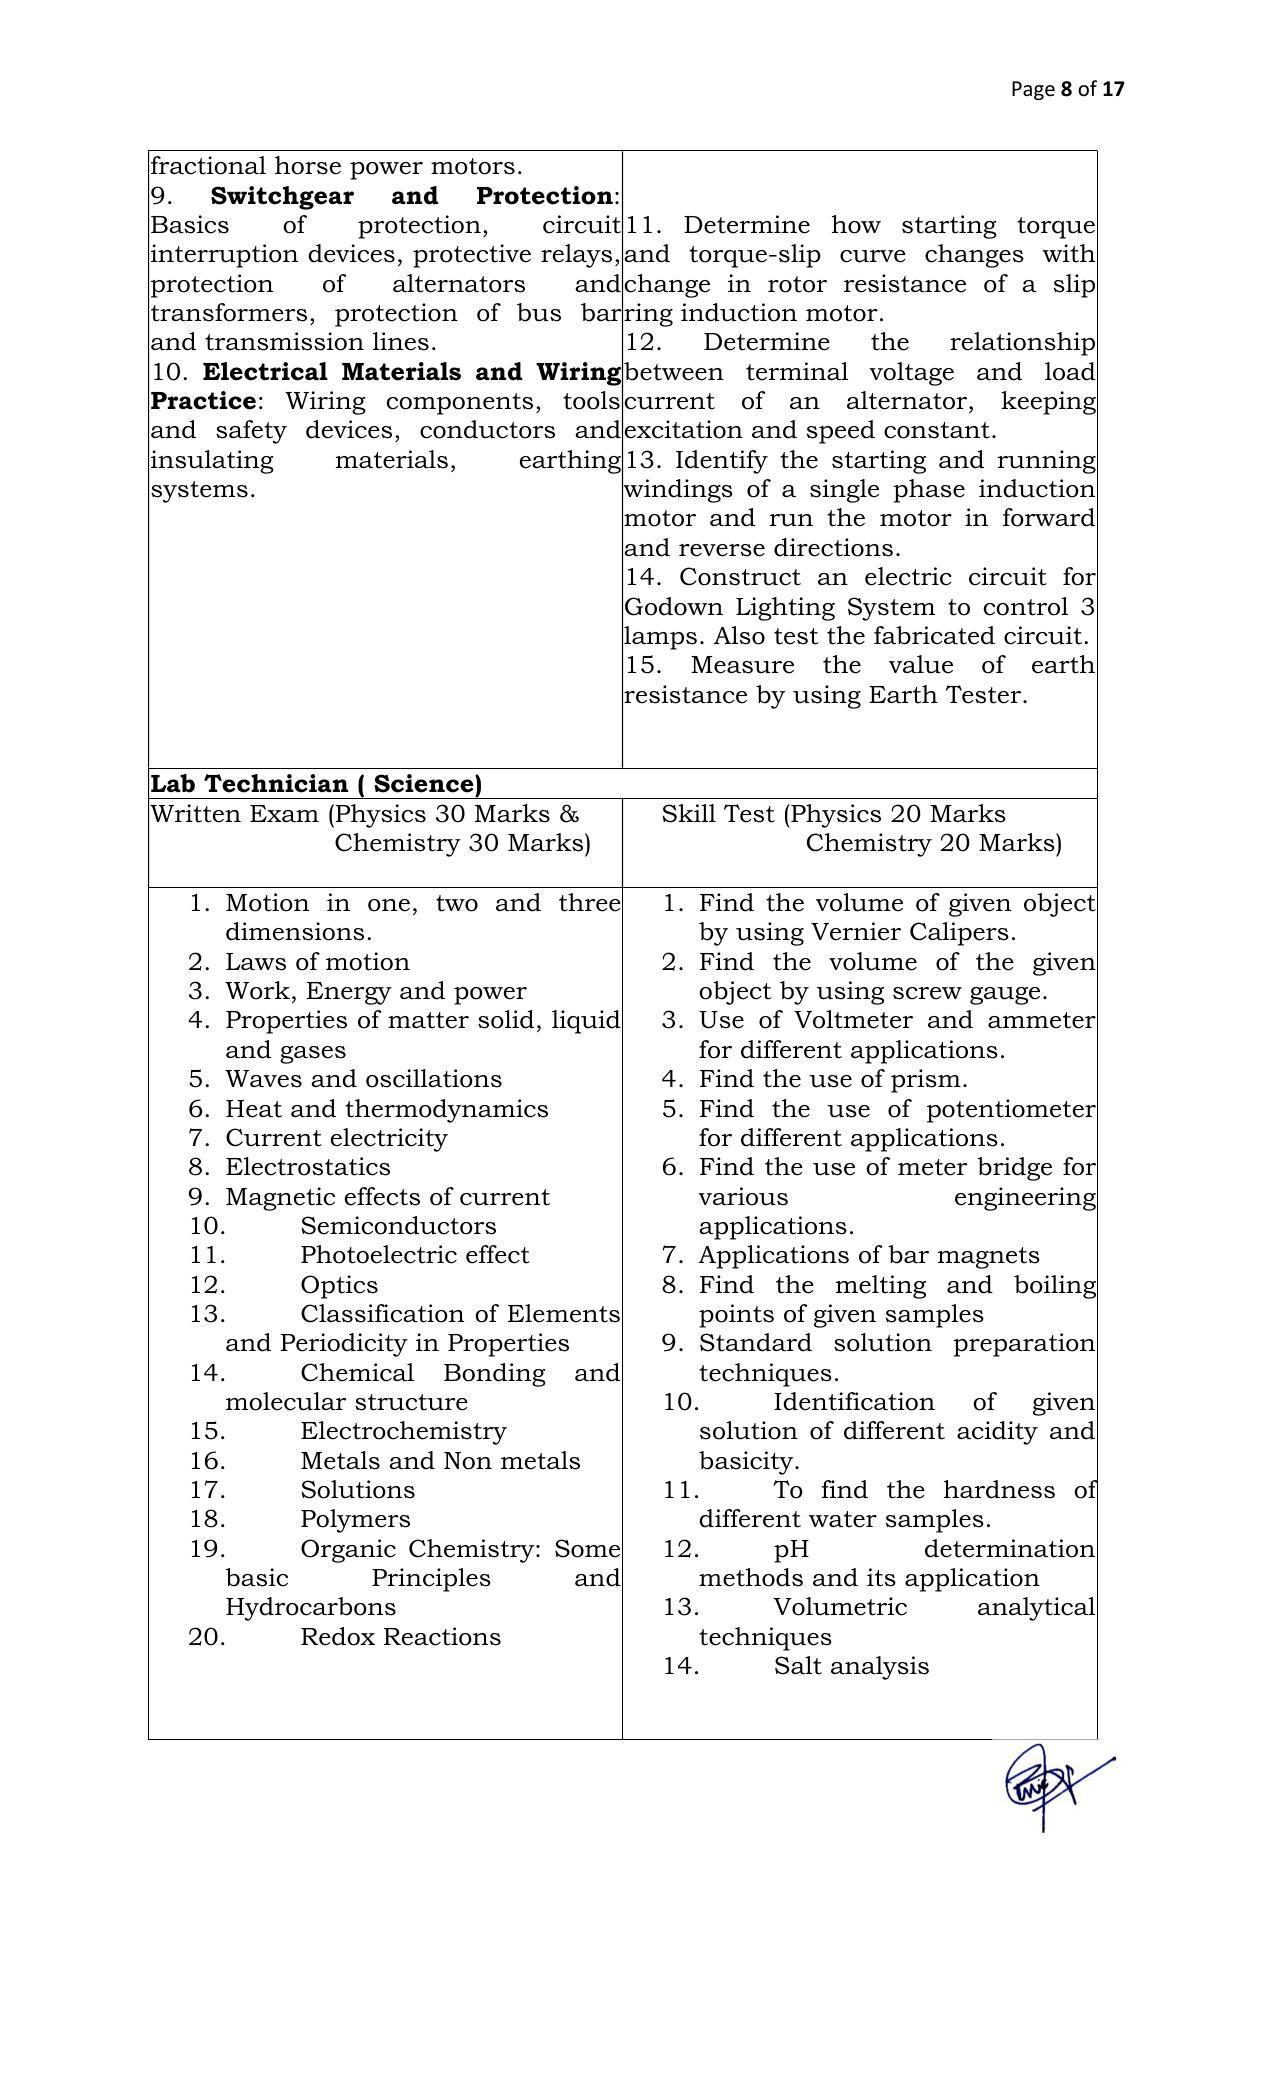 DBRAIT Invites Application for Lab Technician, Instructor Recruitment 2022 - Page 15